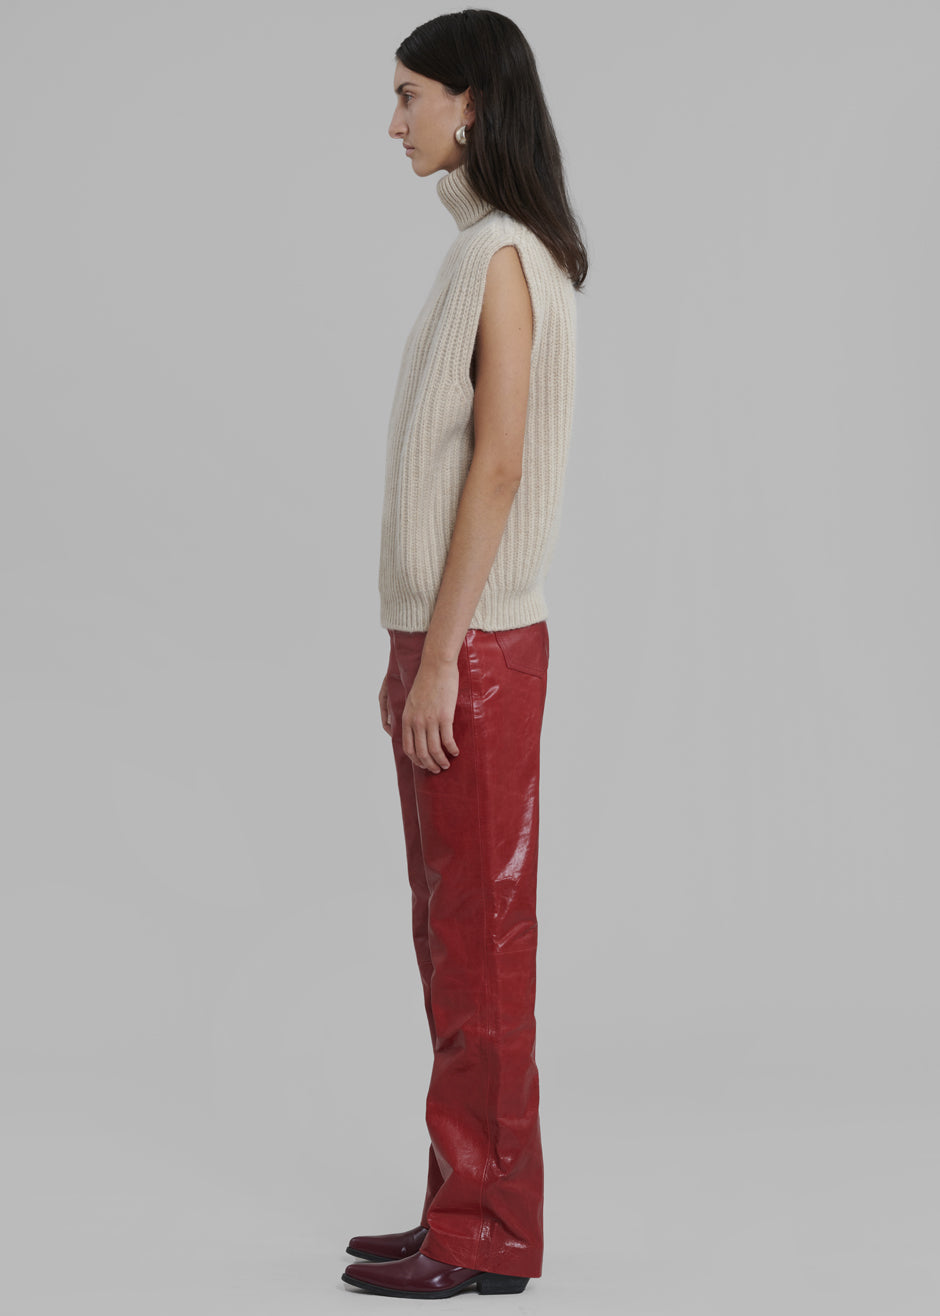 REMAIN Pants Crunchy Leather - Chili Pepper - 3